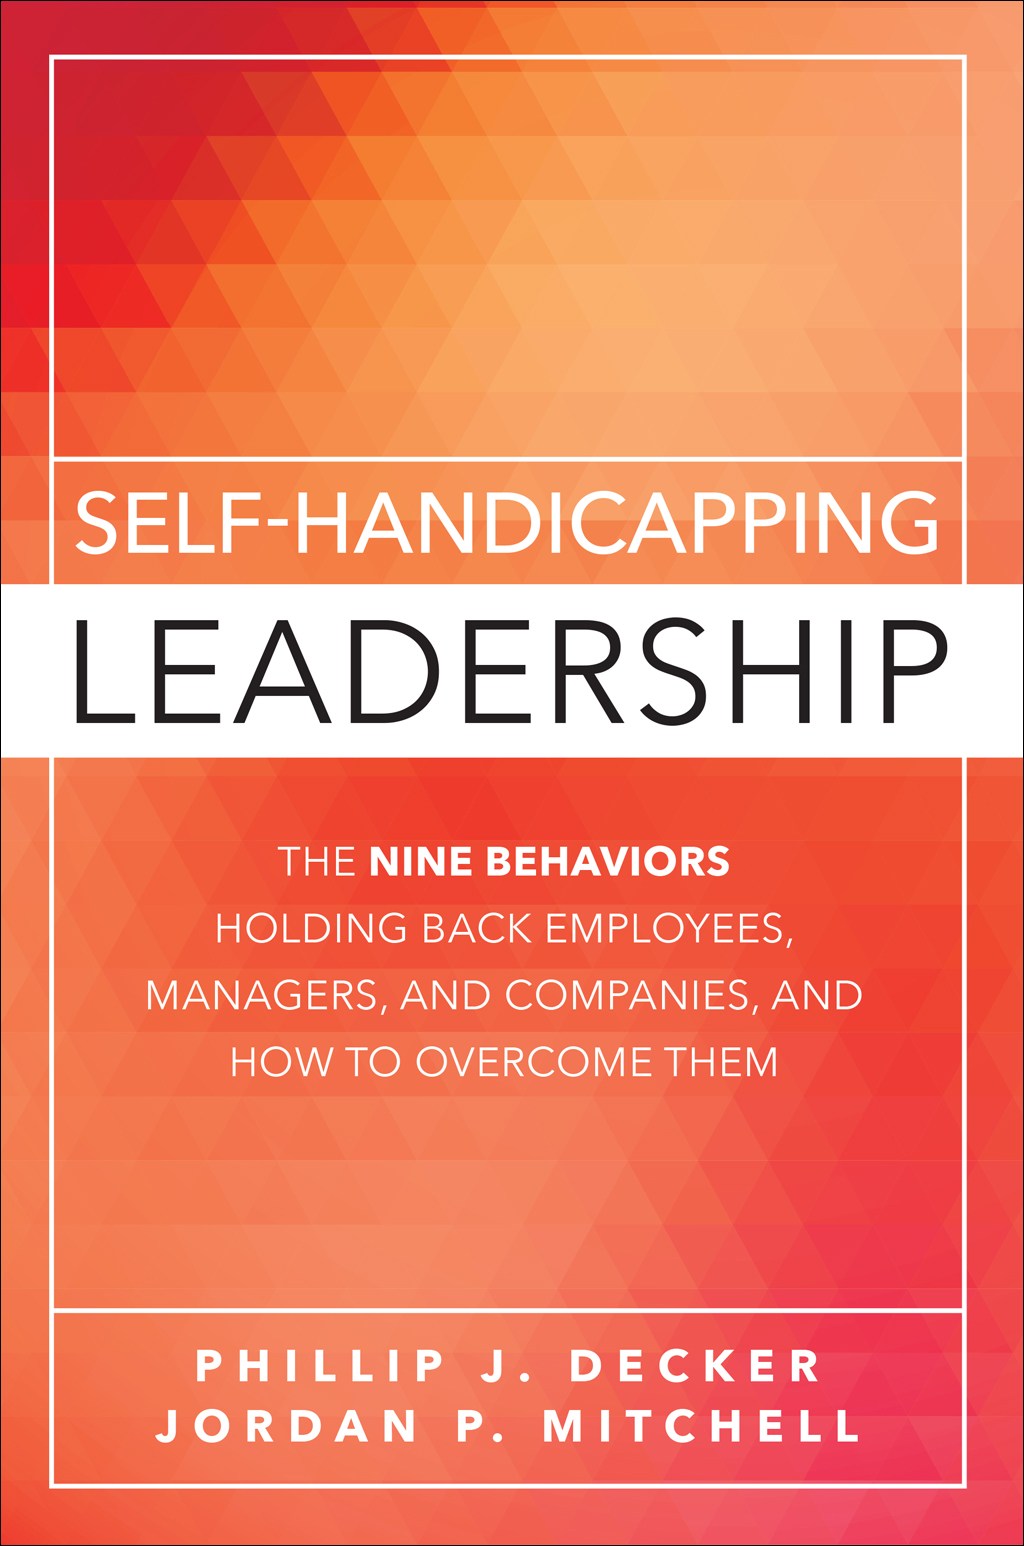 Self-Handicapping Leadership: The Nine Behaviors Holding Back Employees, Managers, and Companies, and How to Overcome Them